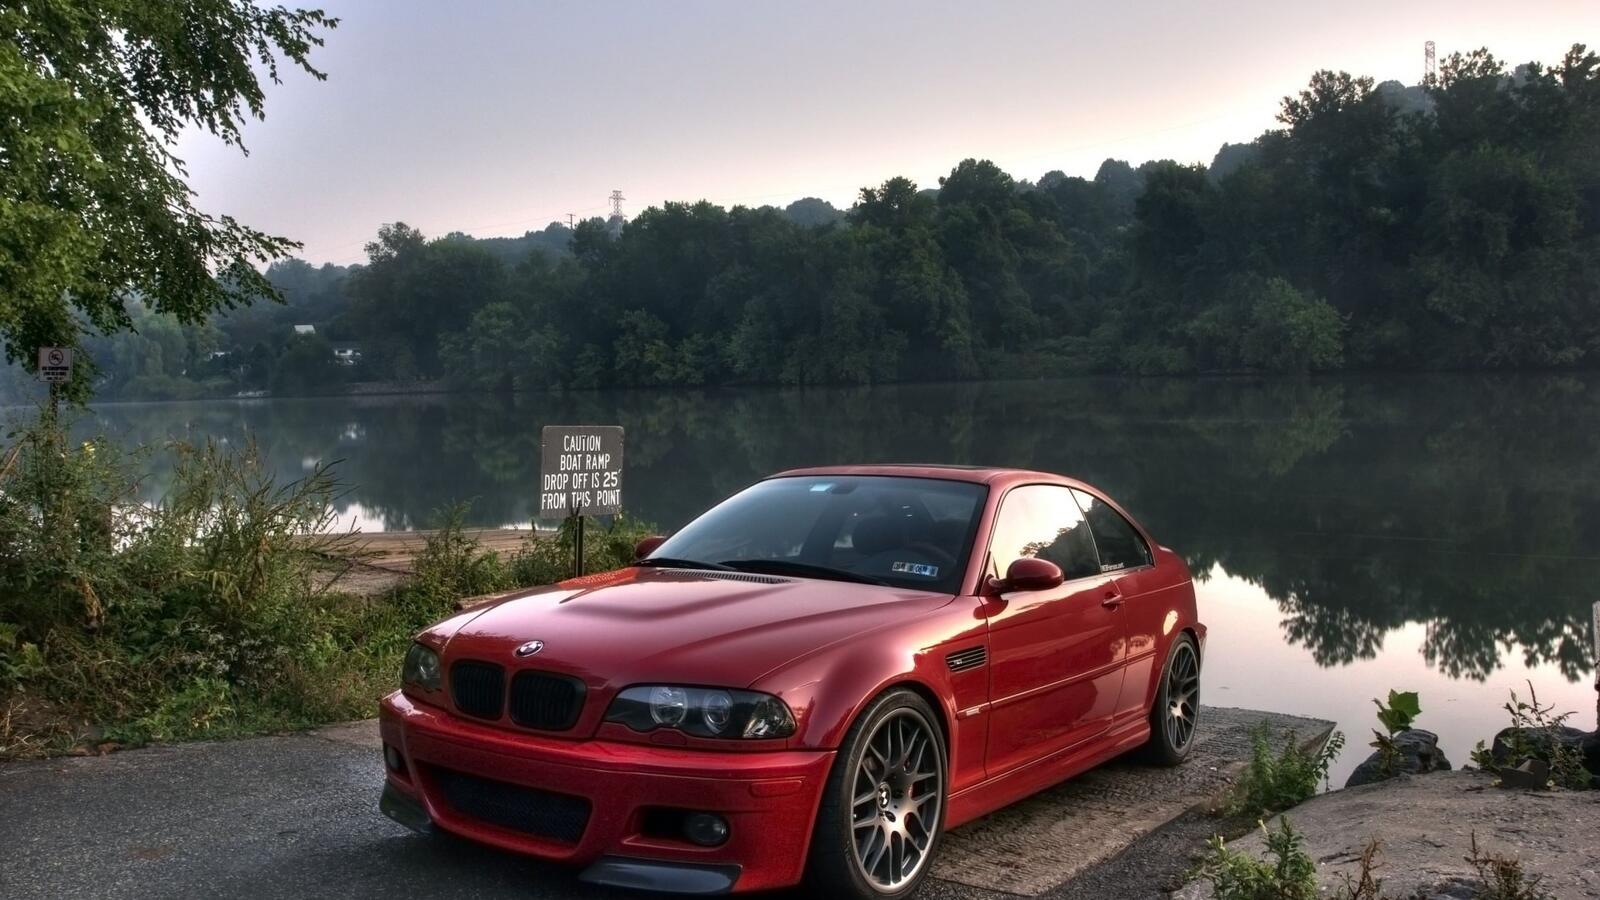 Free photo A red bmw m3 is parked by the river.